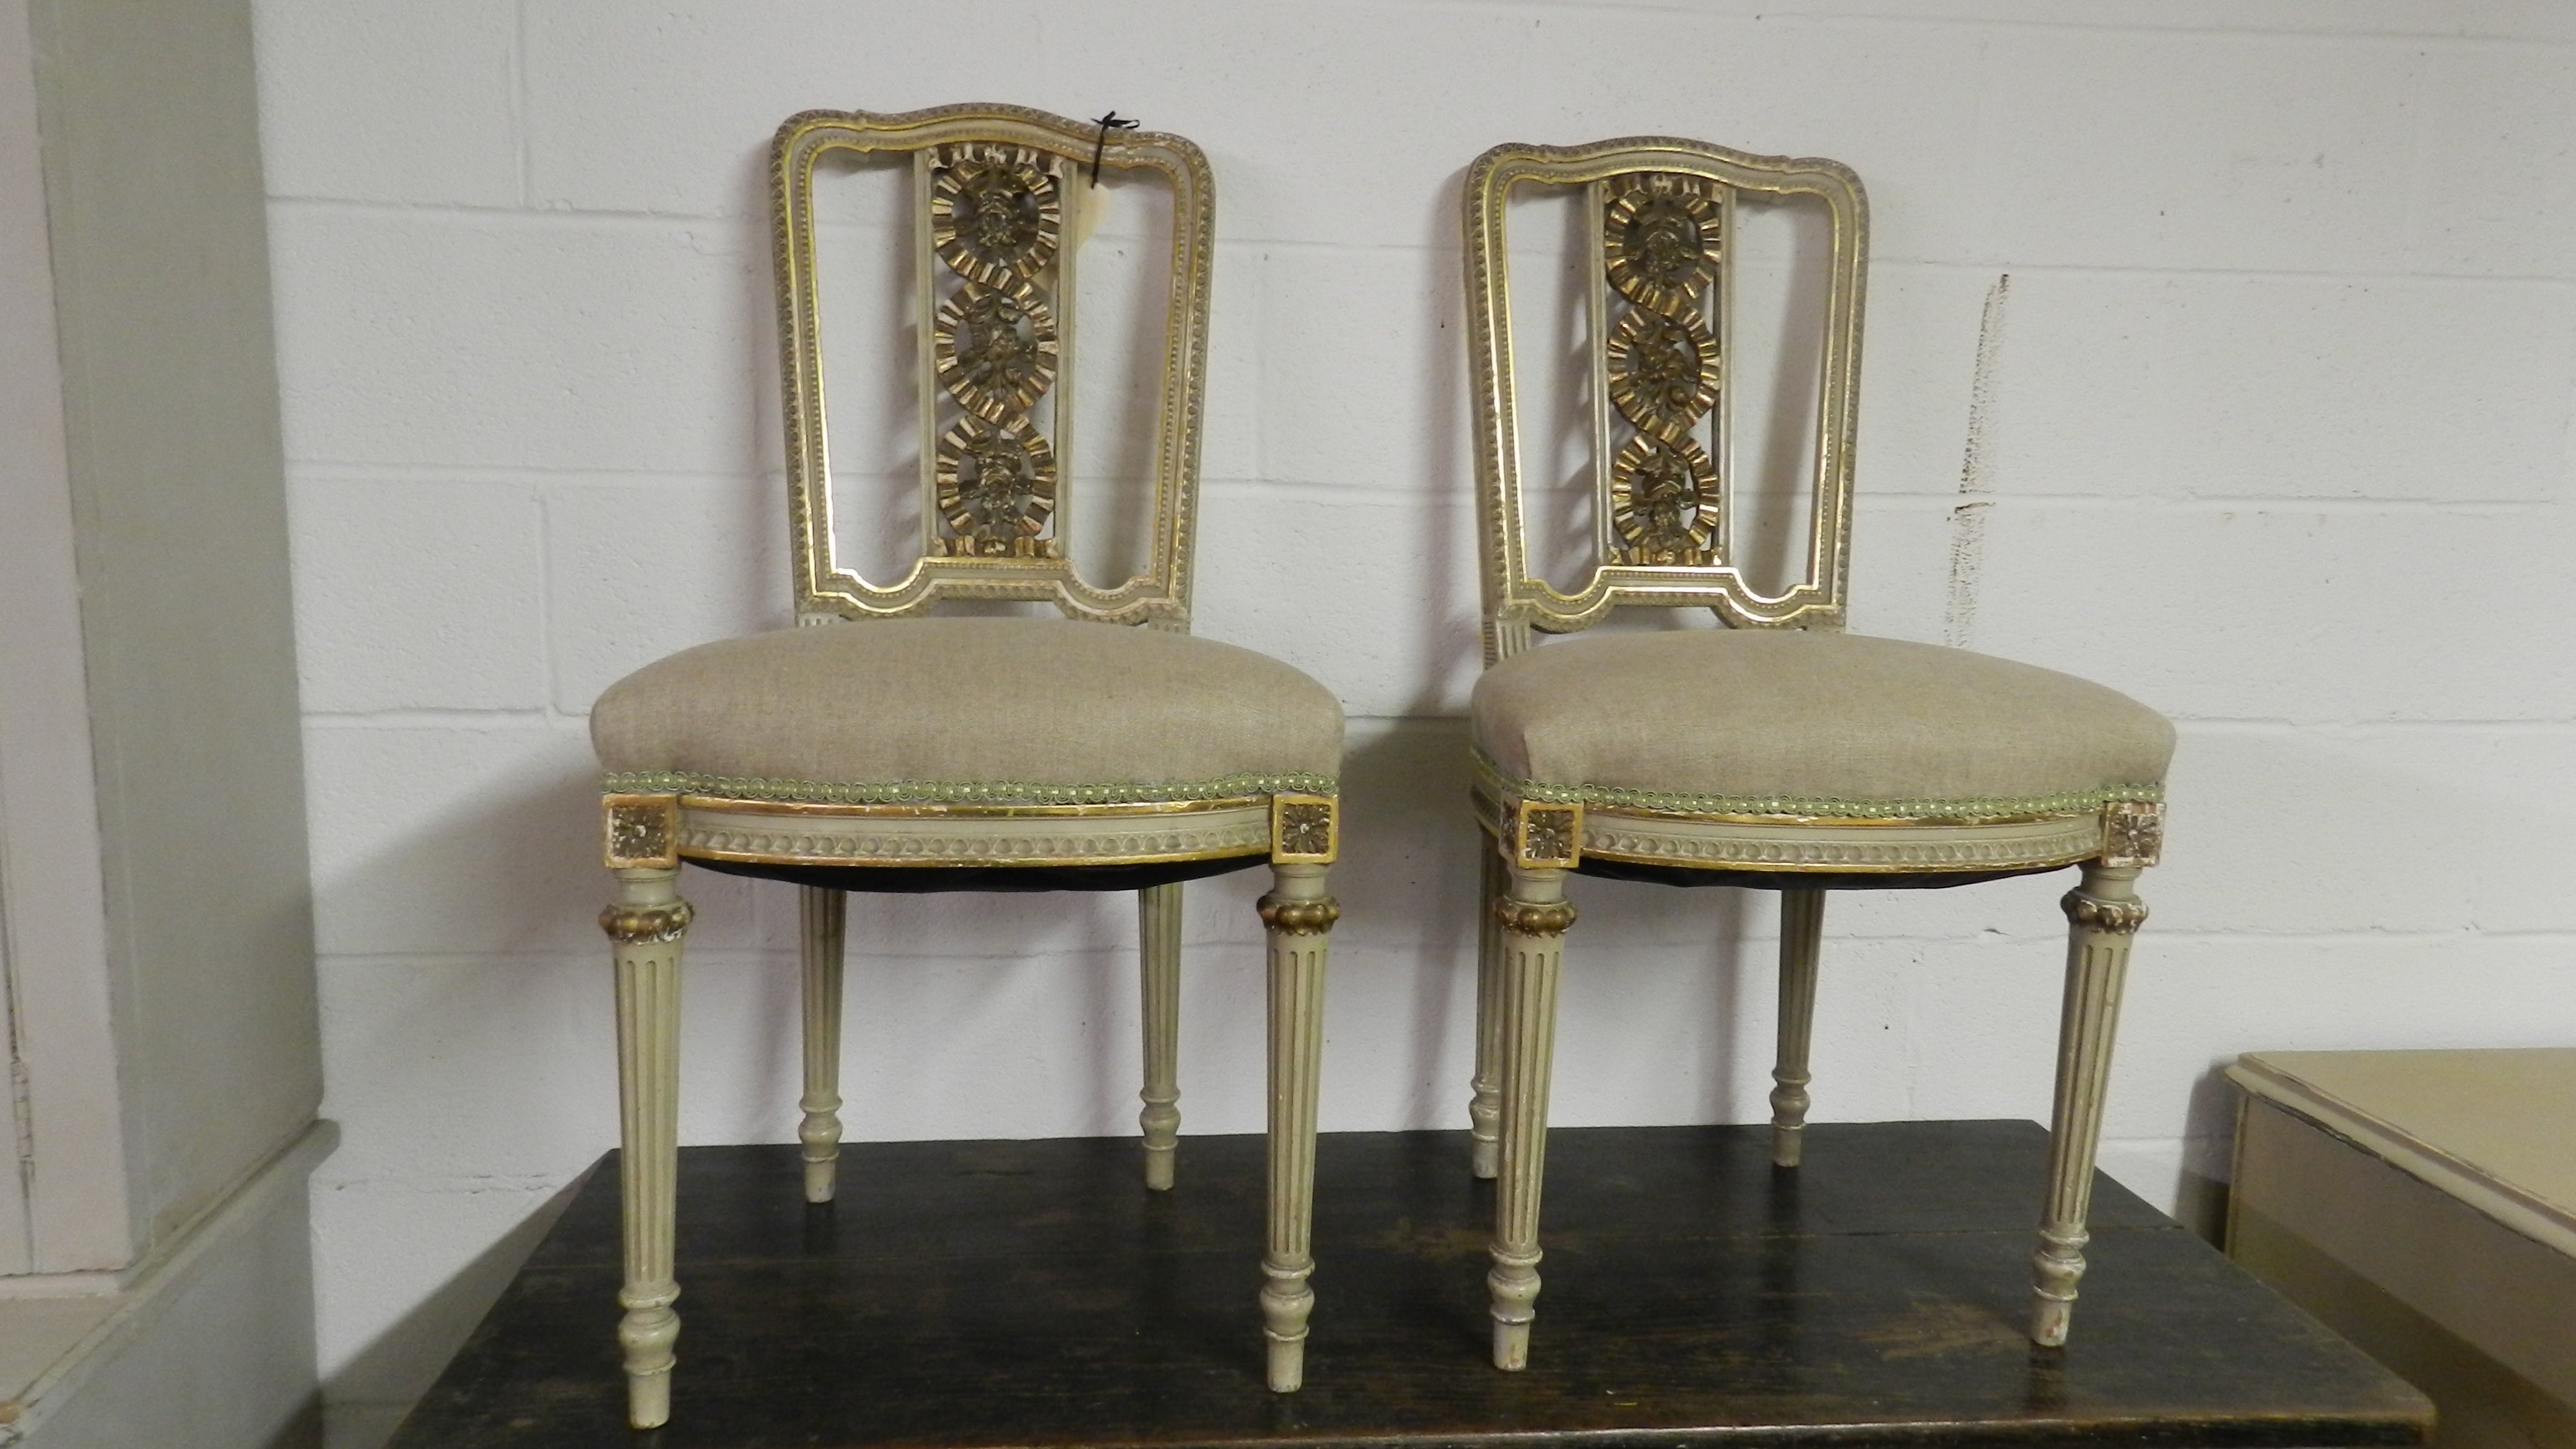 A Pair of Original Painted French Chairs